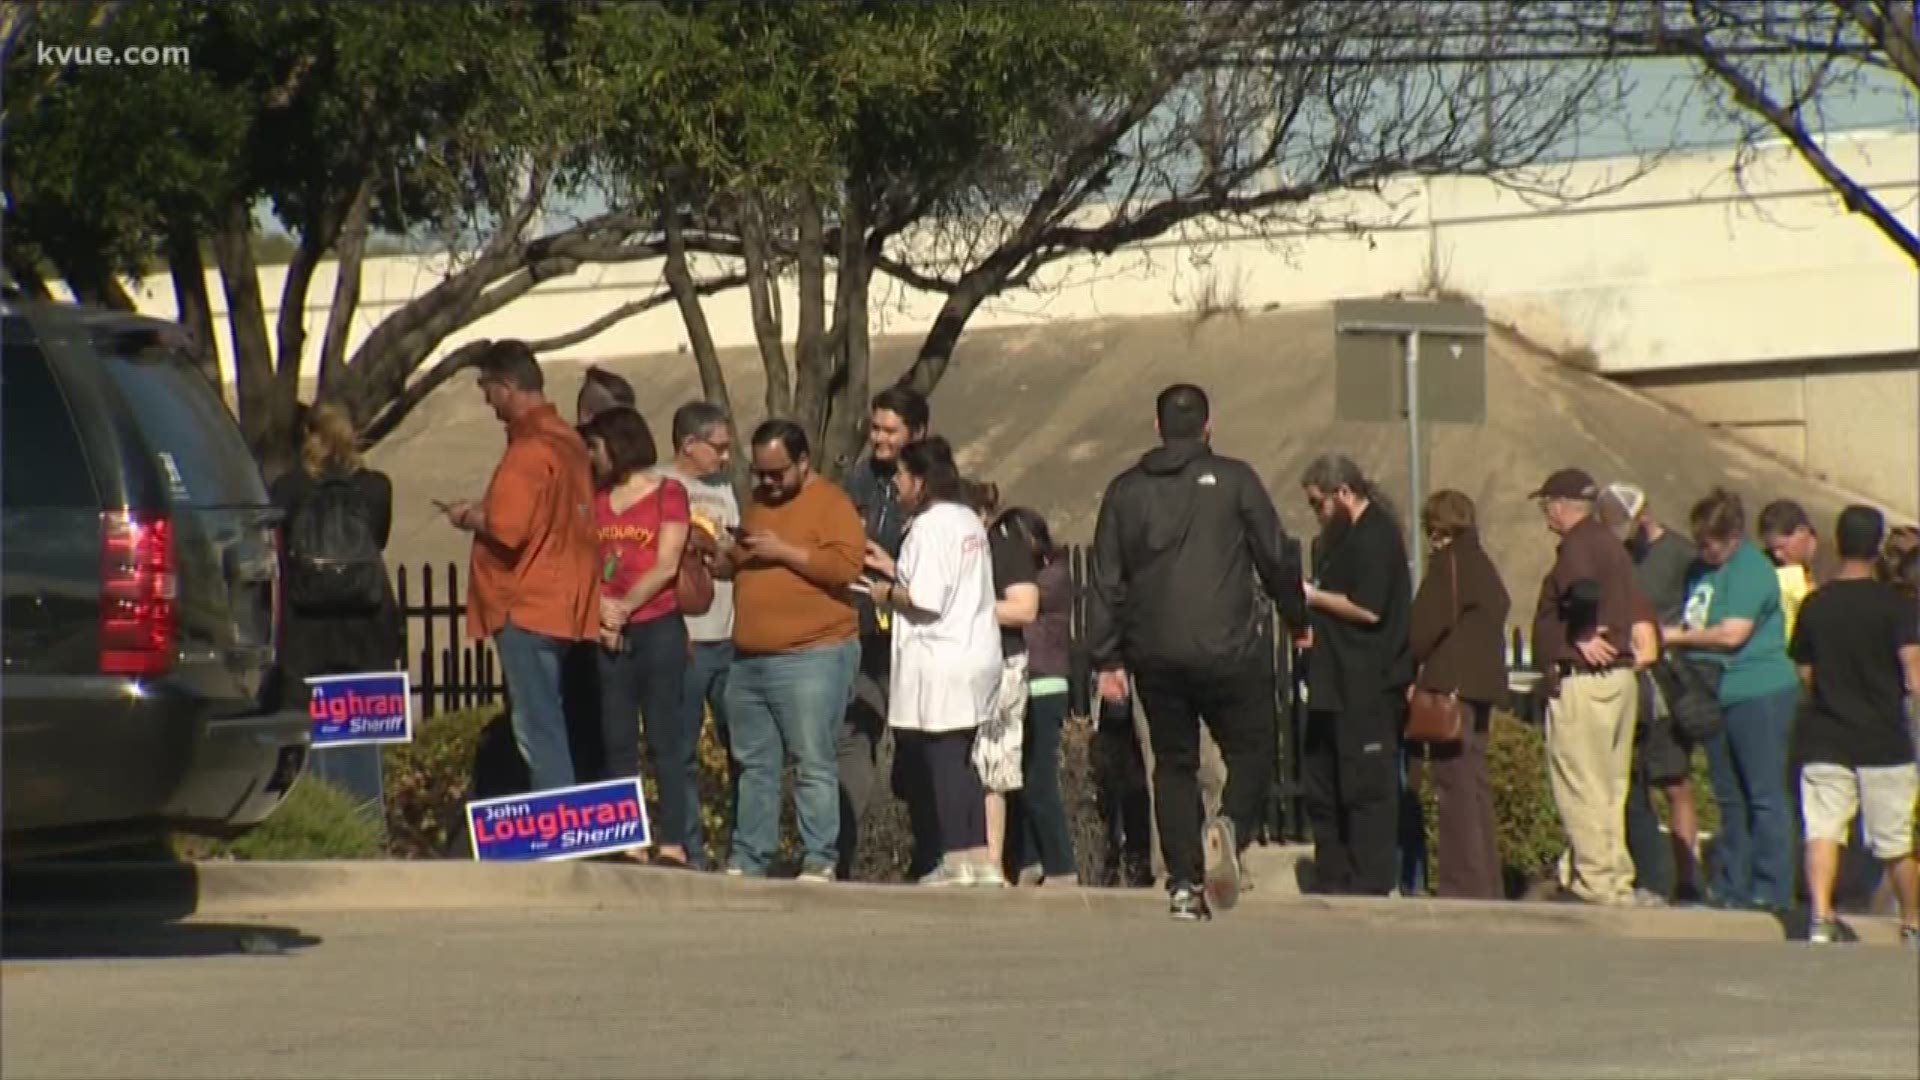 The Travis County clerk says she's happy so many people took advantage of early voting.